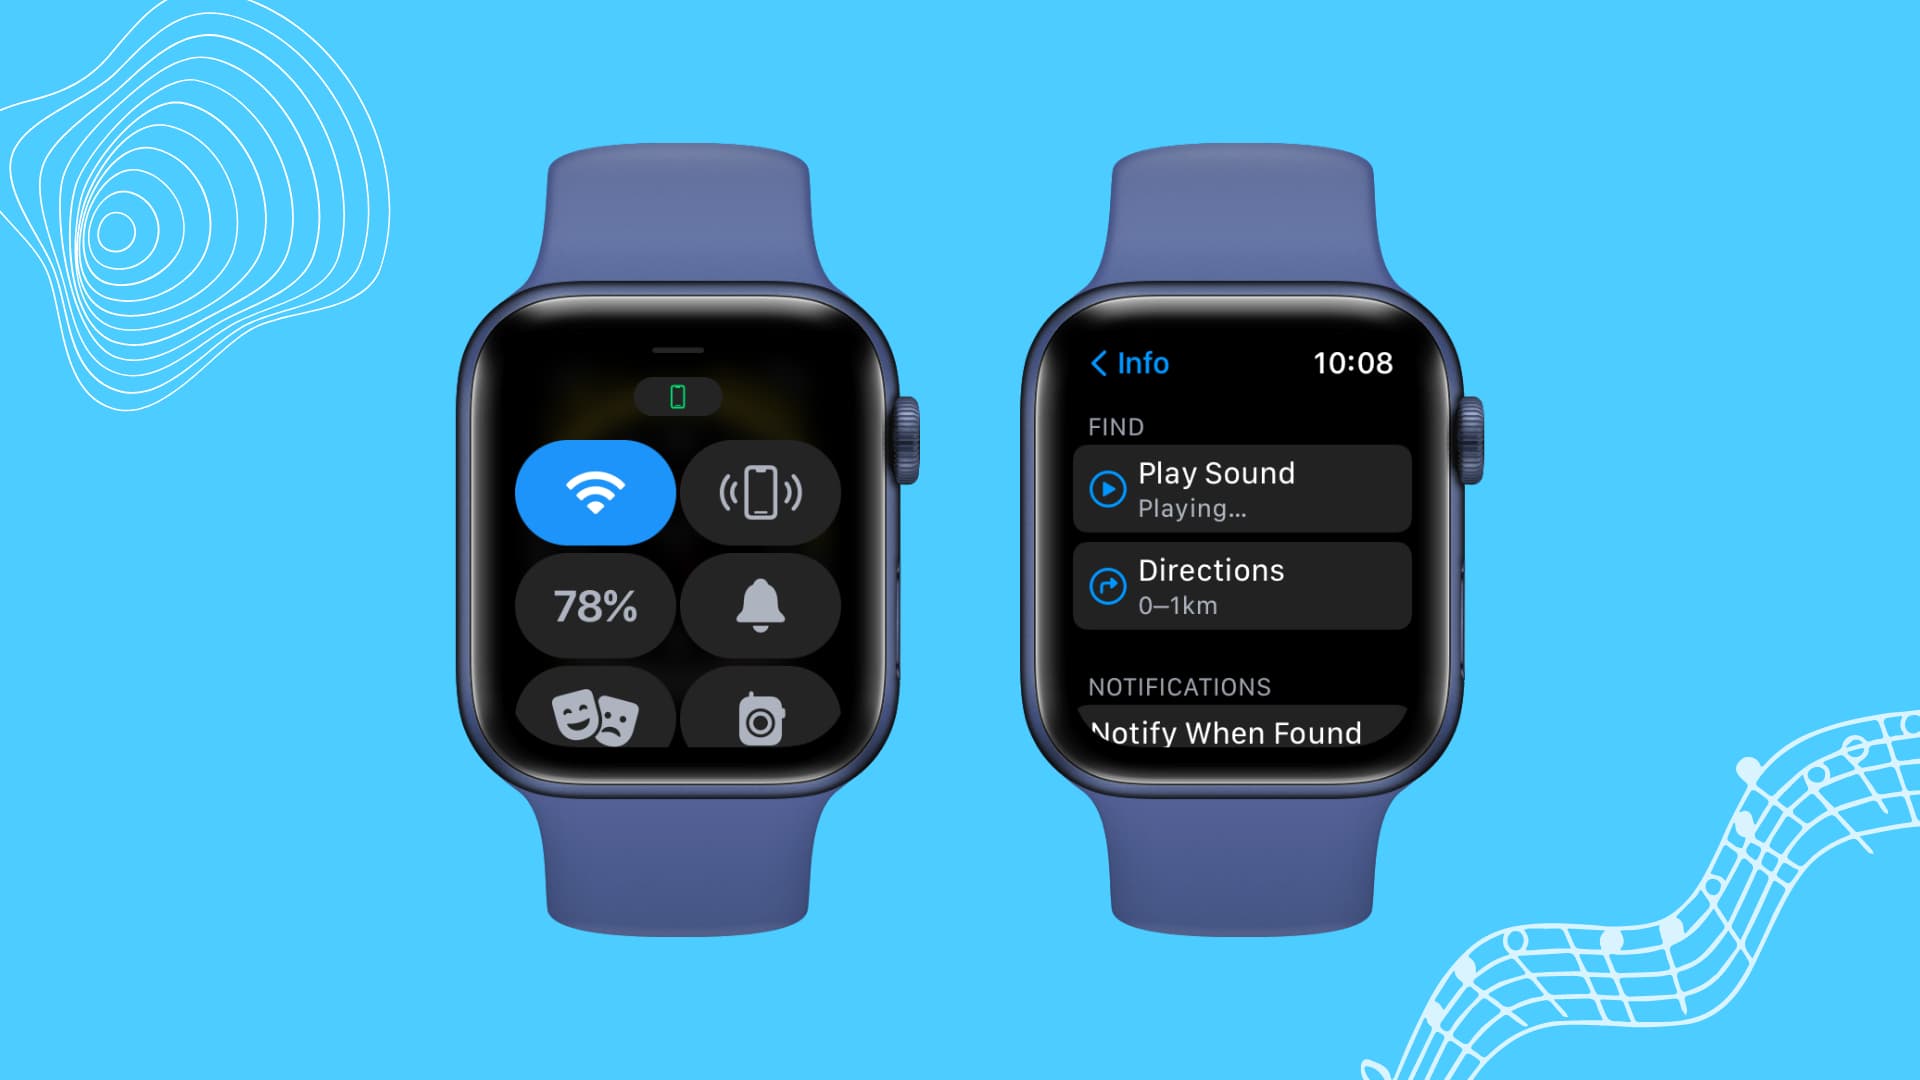 Ping your iPhone using Apple Watch